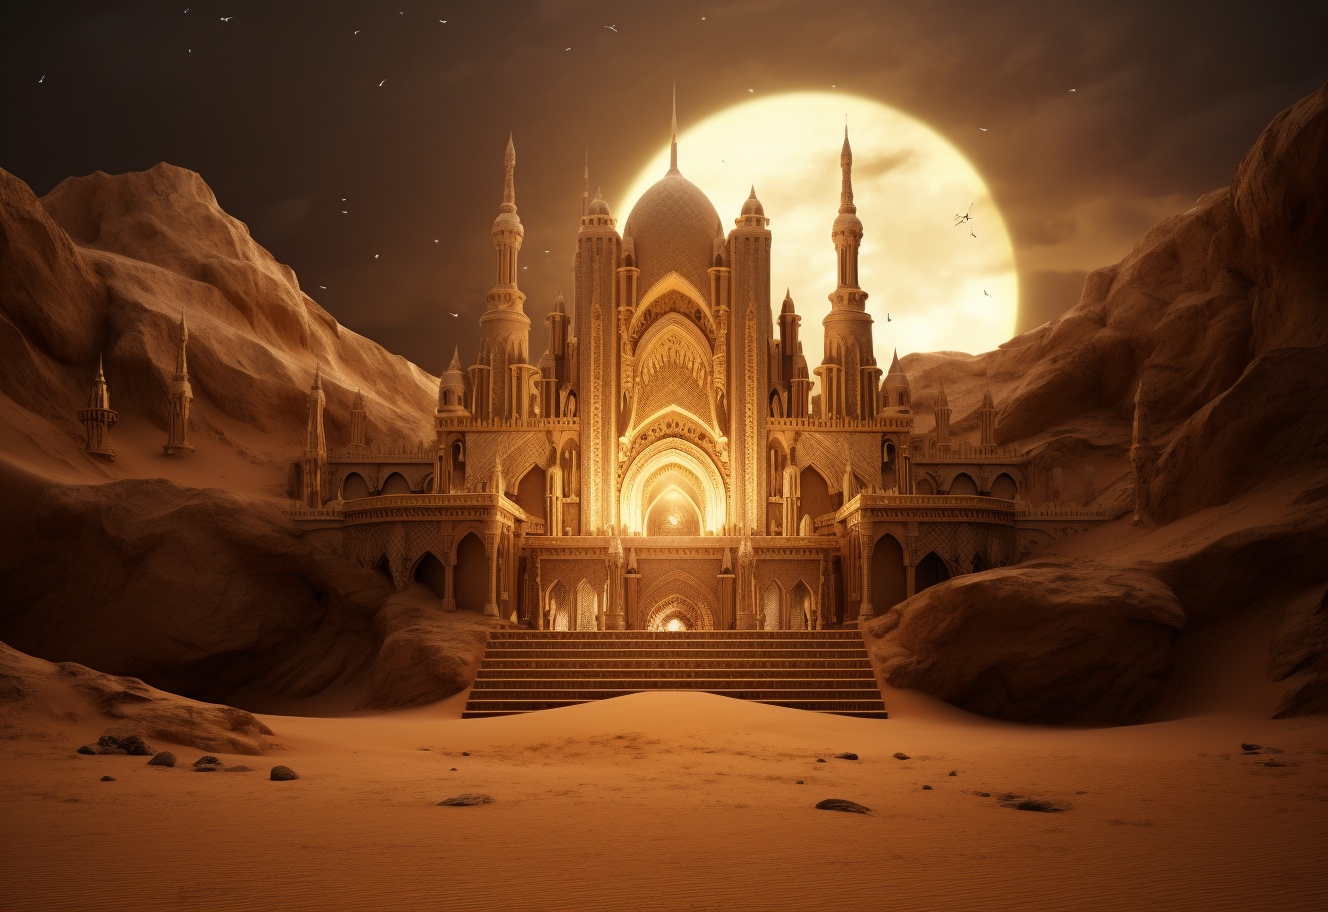 secret-temple-in-the-sand